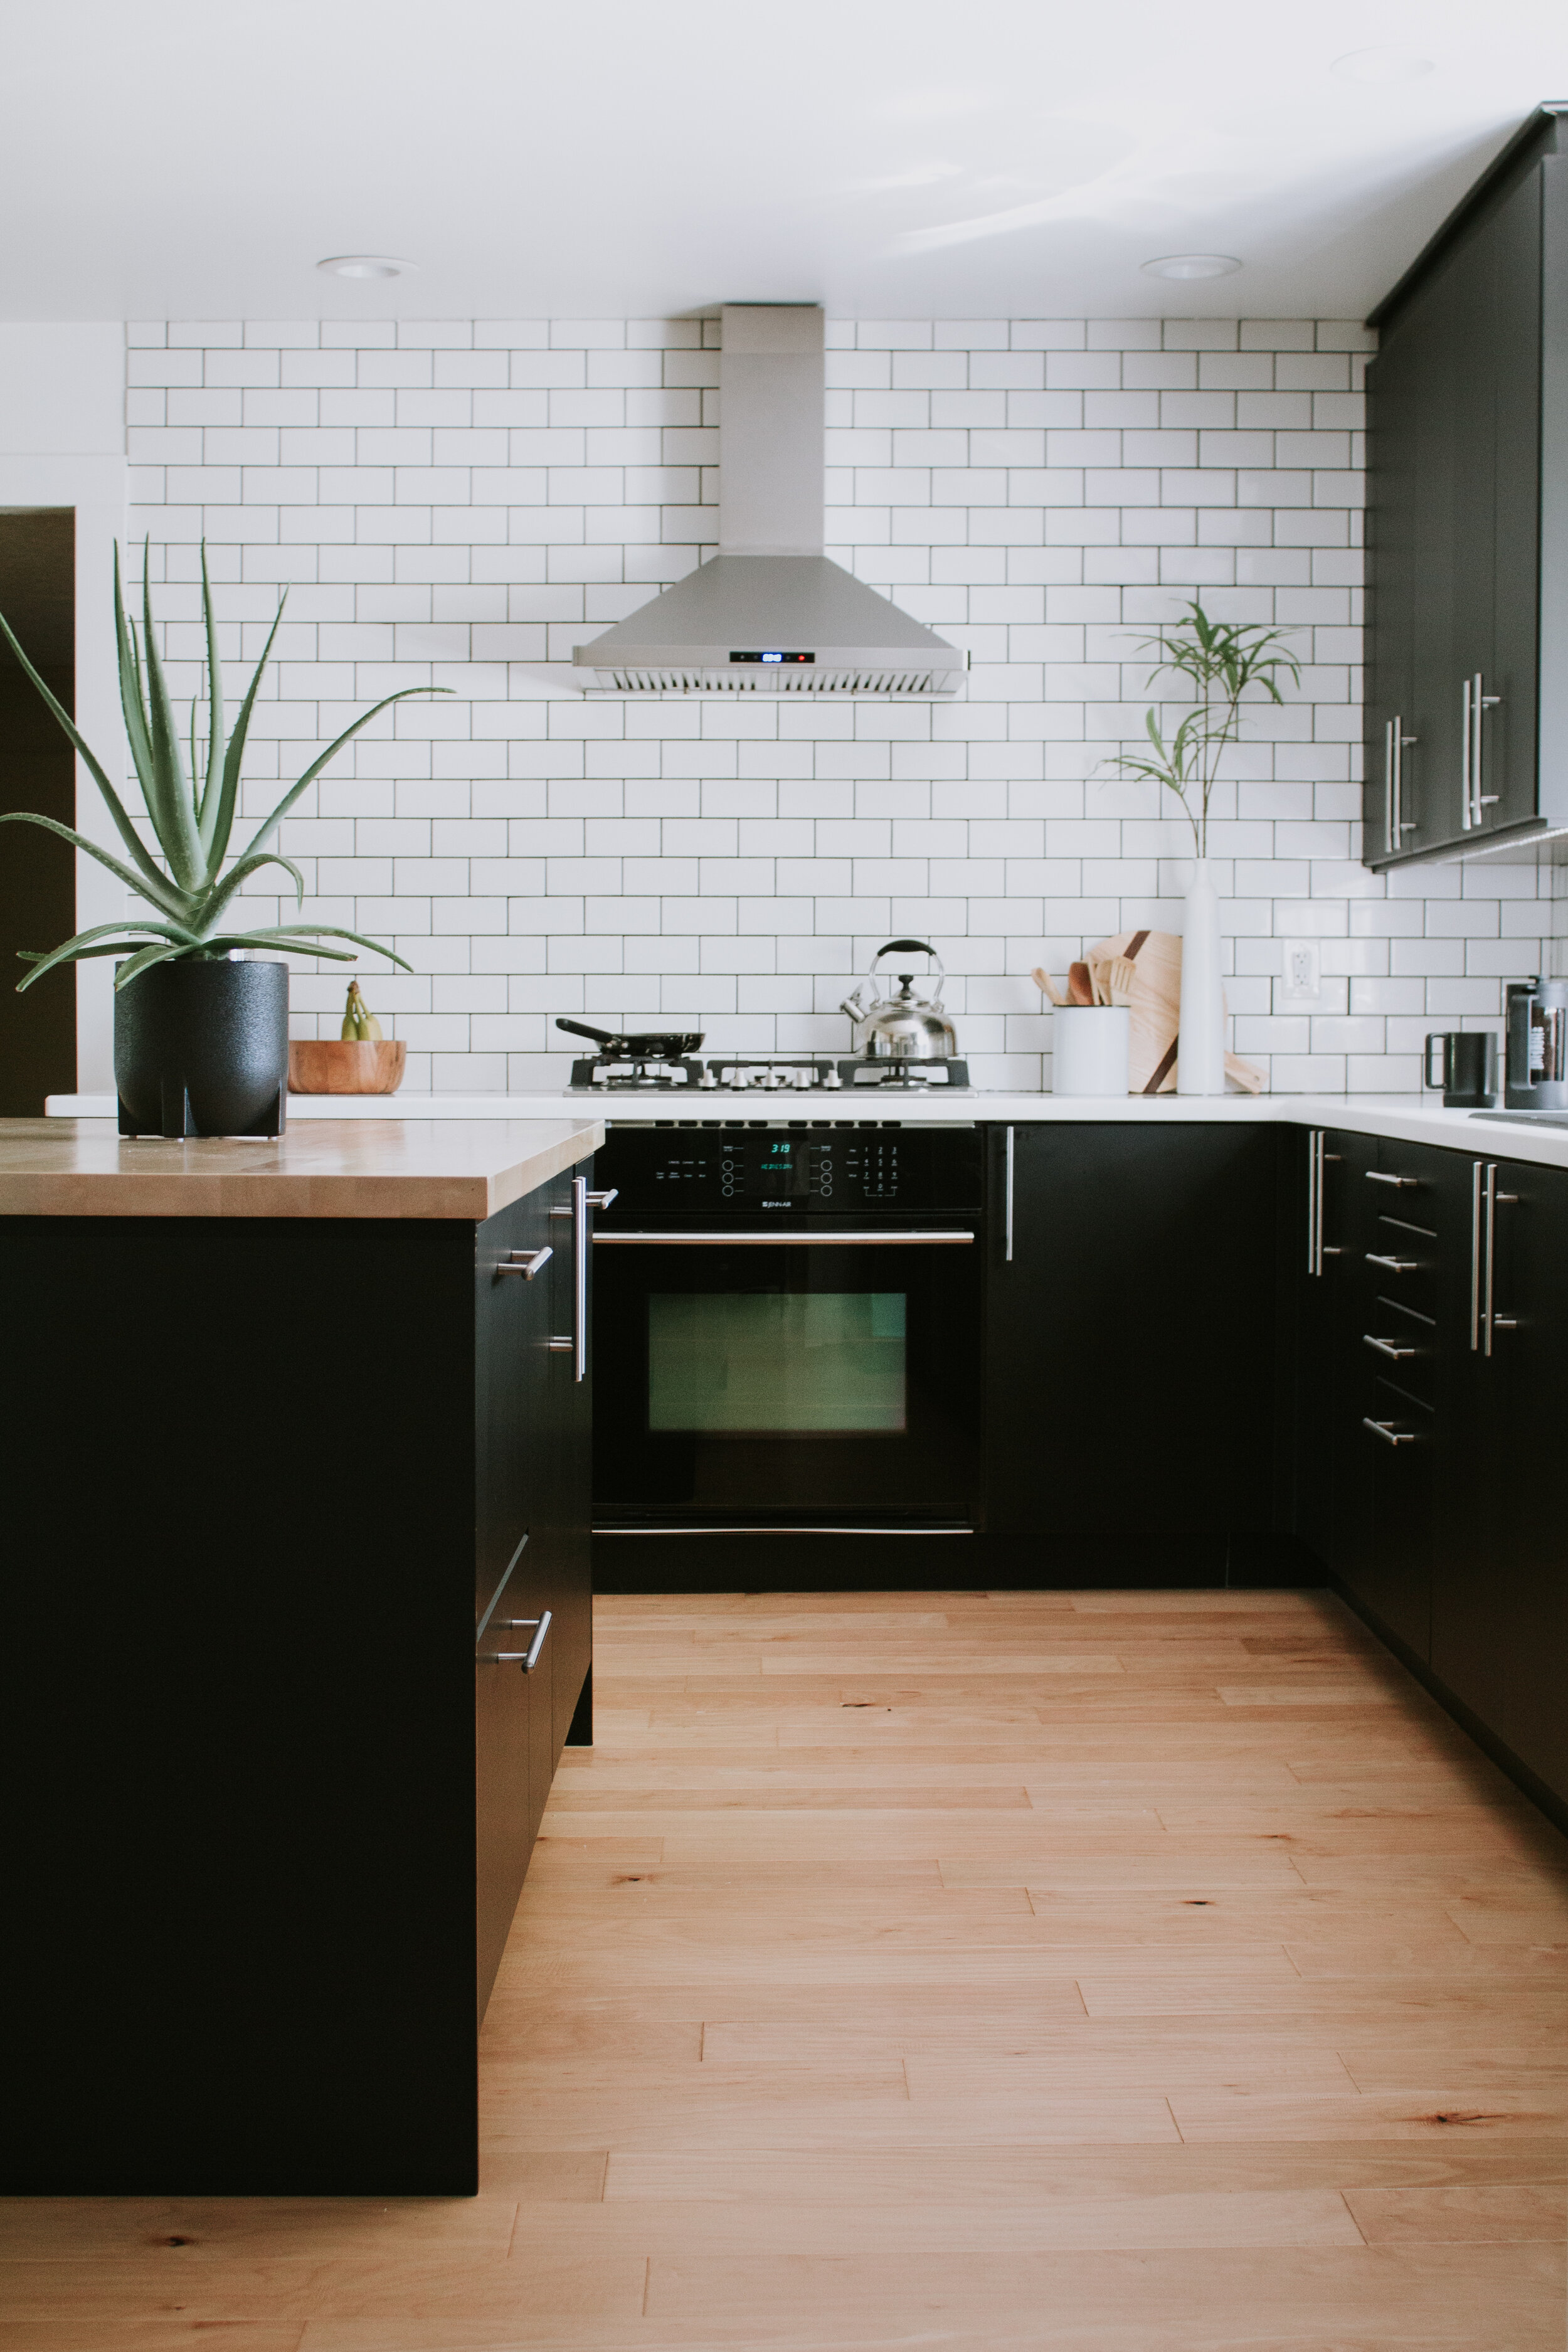 All the details on our kitchen countertops. Q+A and our honest opinion of our solid surface countertops. Q+A and care tips for butcher block countertops. | Nadine Stay